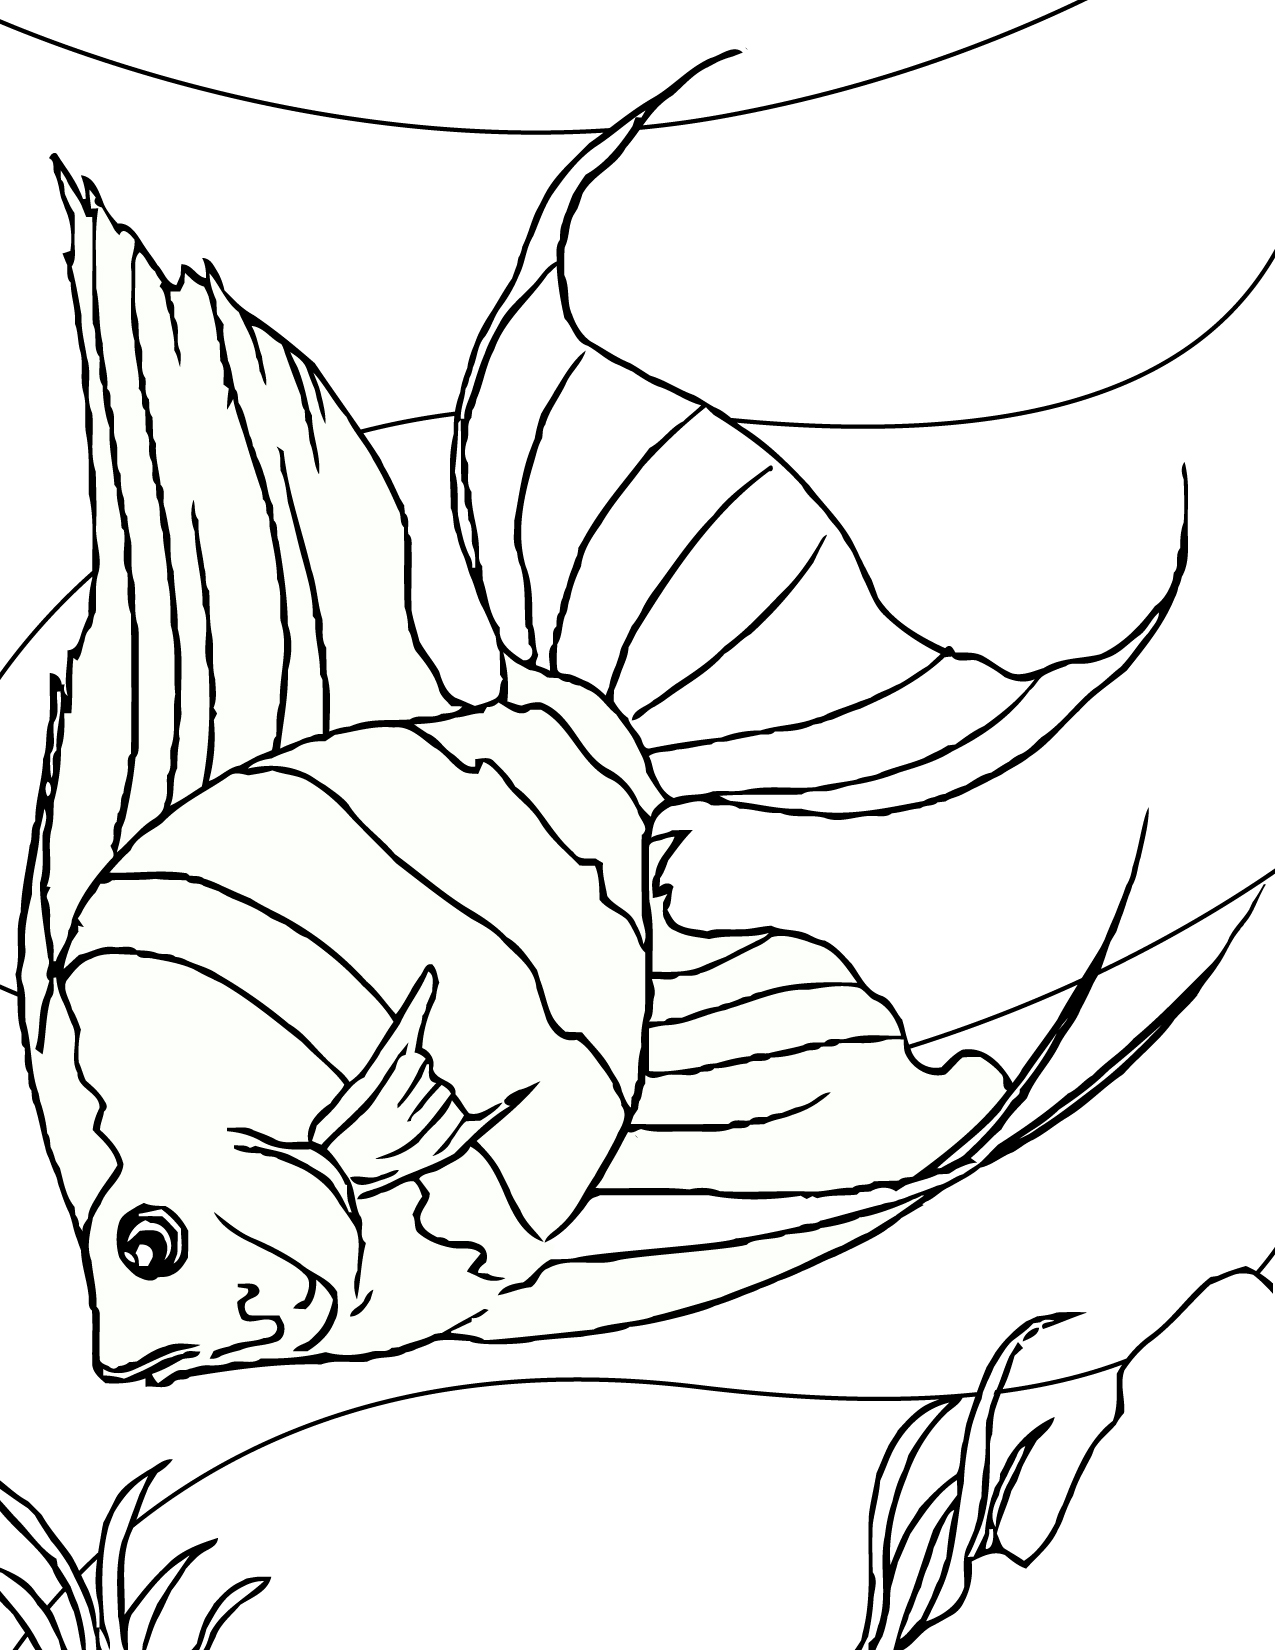 Trends For > Rainbow Fish Coloring Pages For Kids